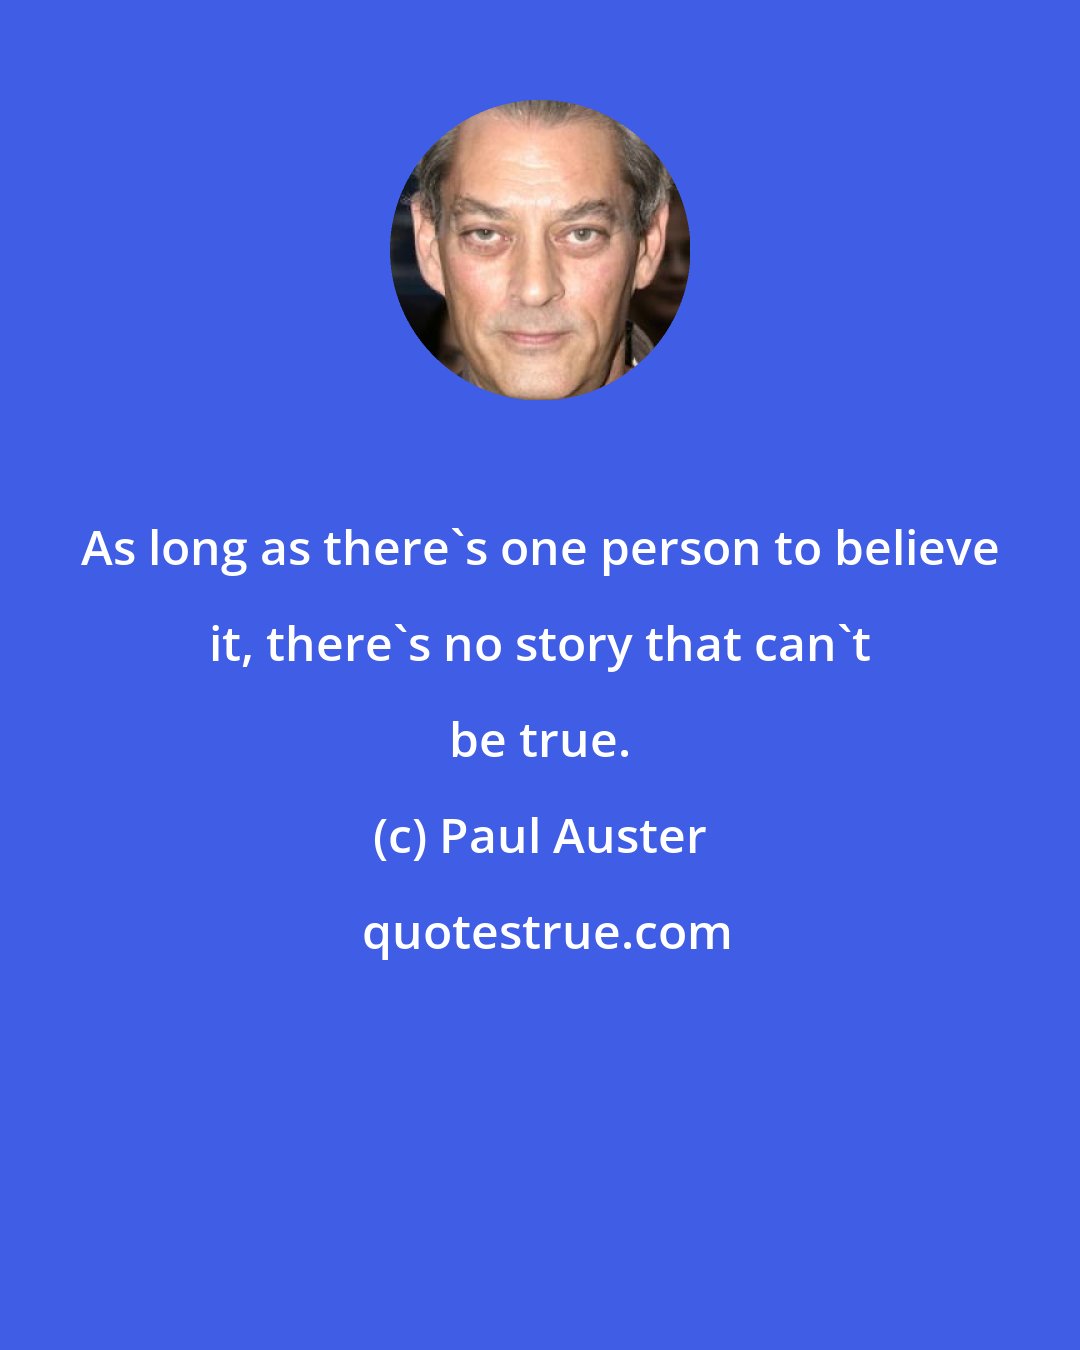 Paul Auster: As long as there's one person to believe it, there's no story that can't be true.